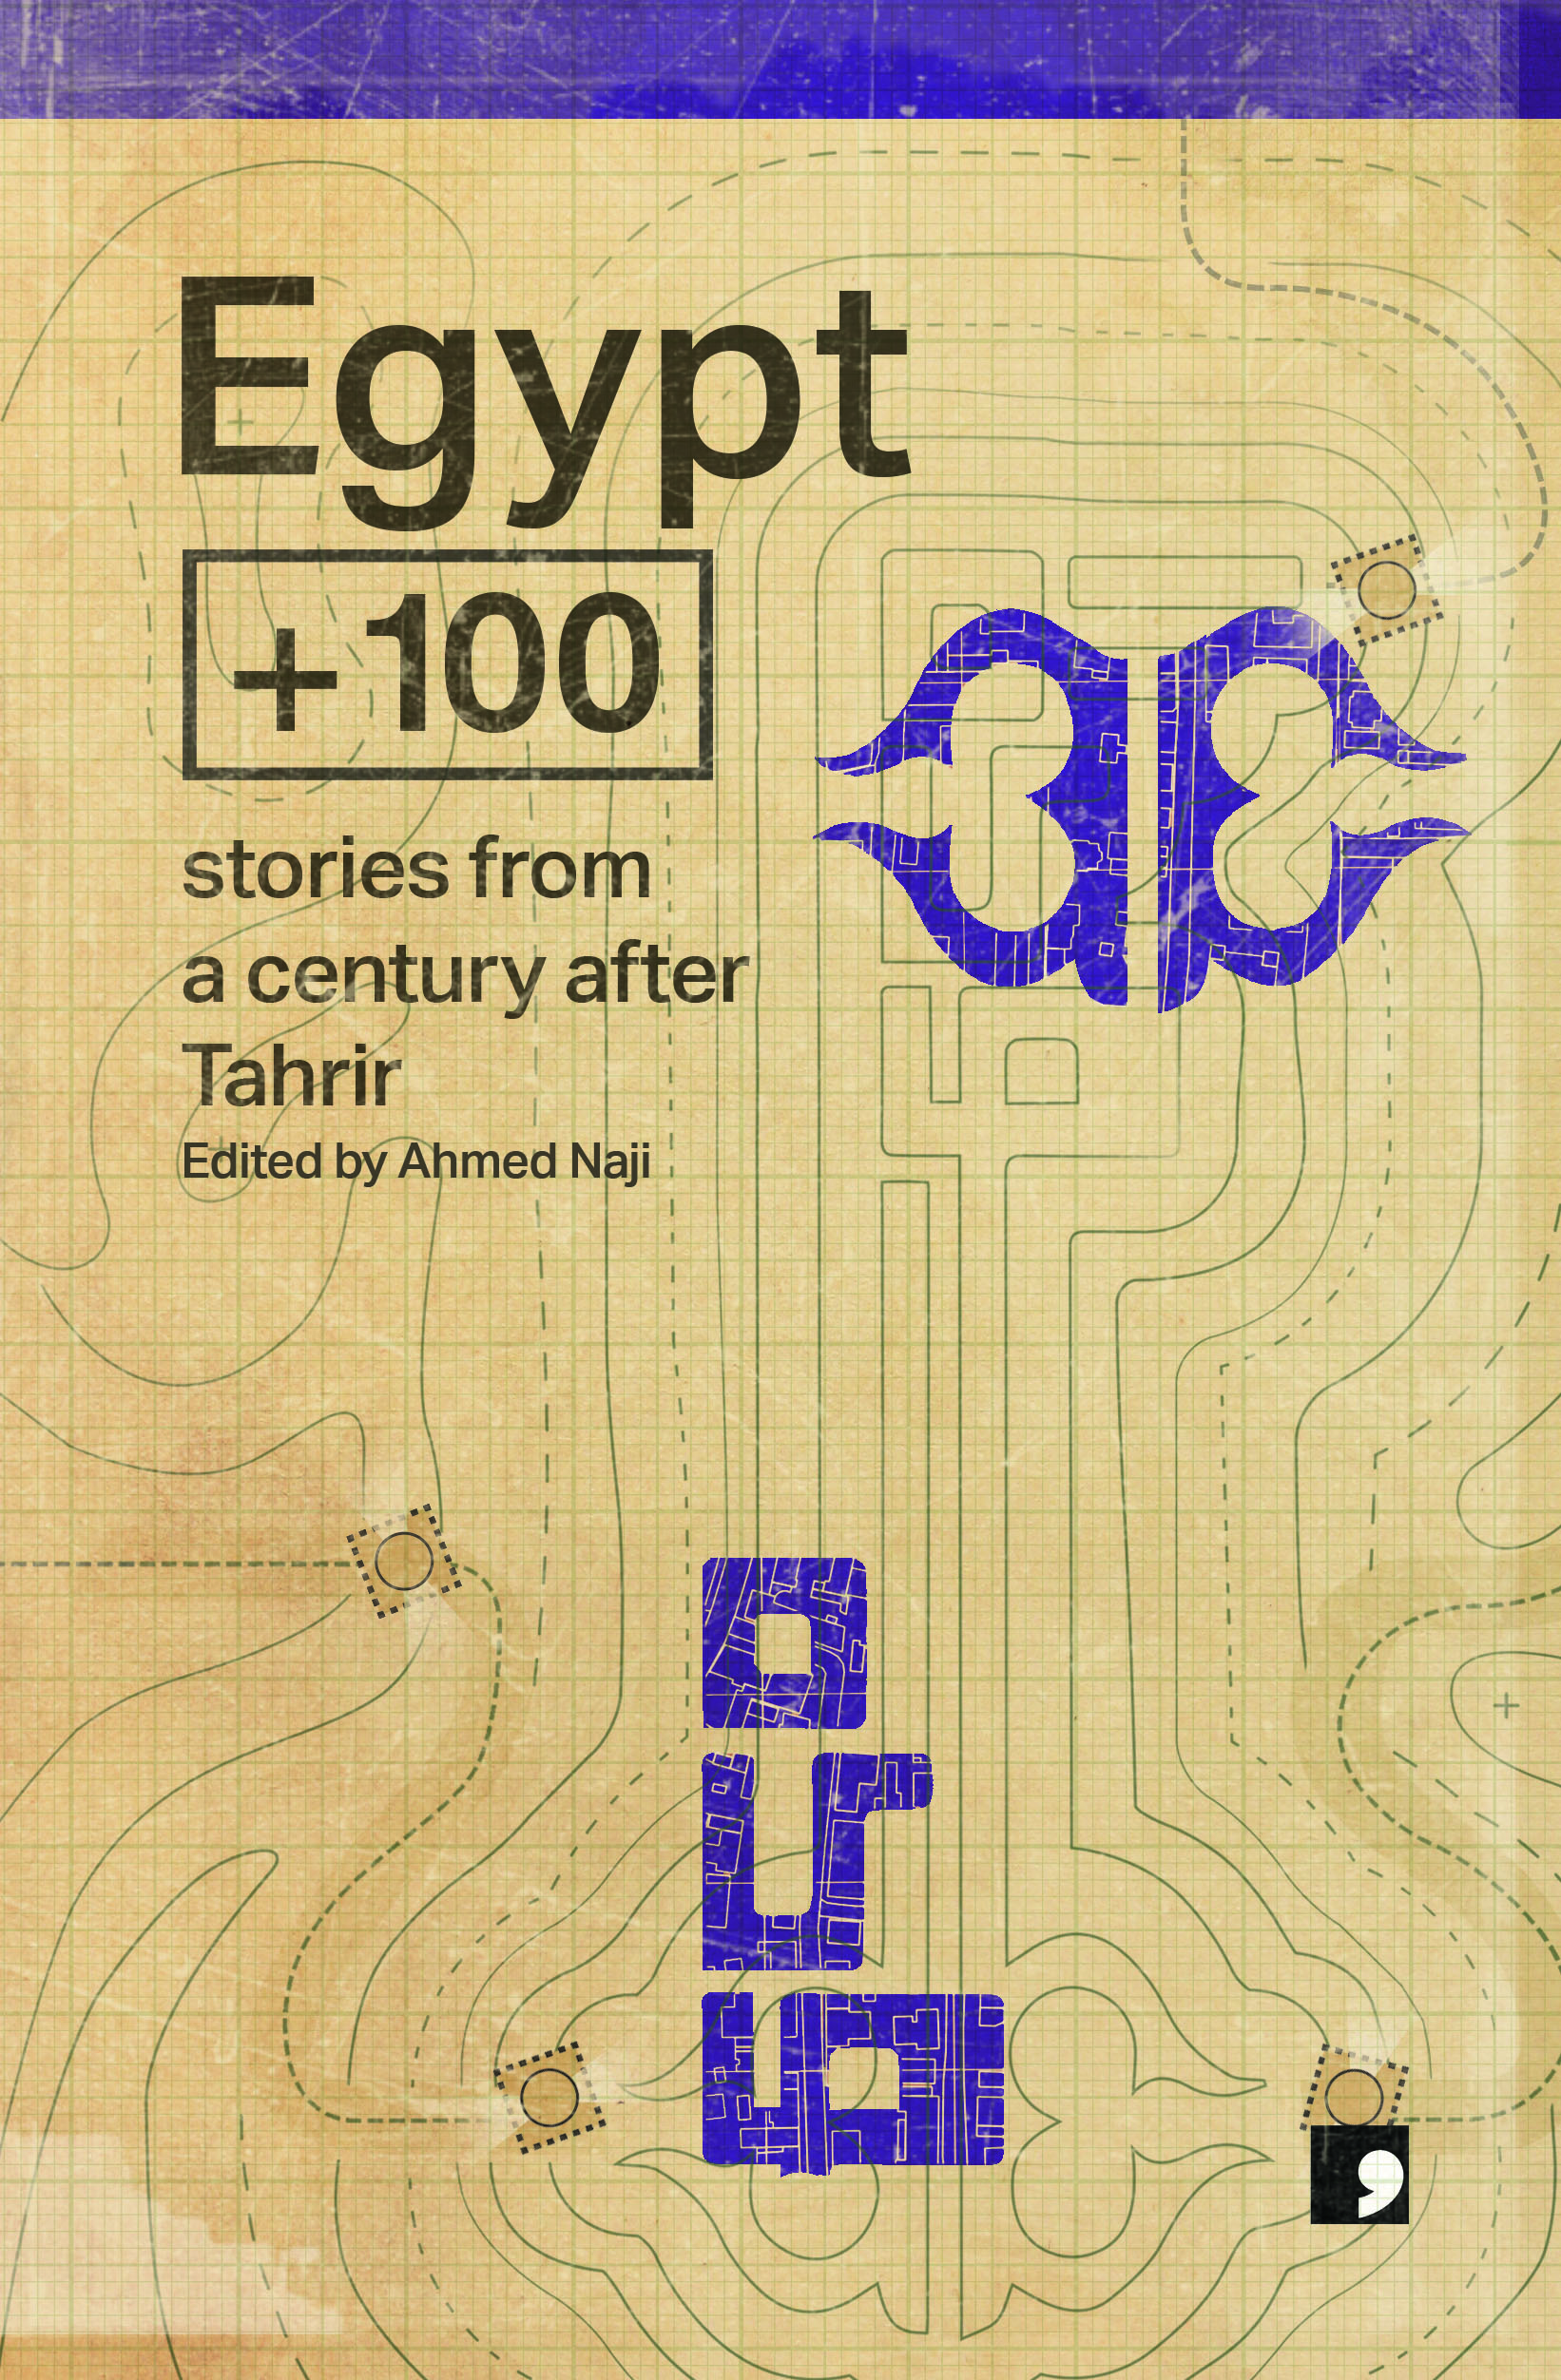 Egypt + 100 book cover